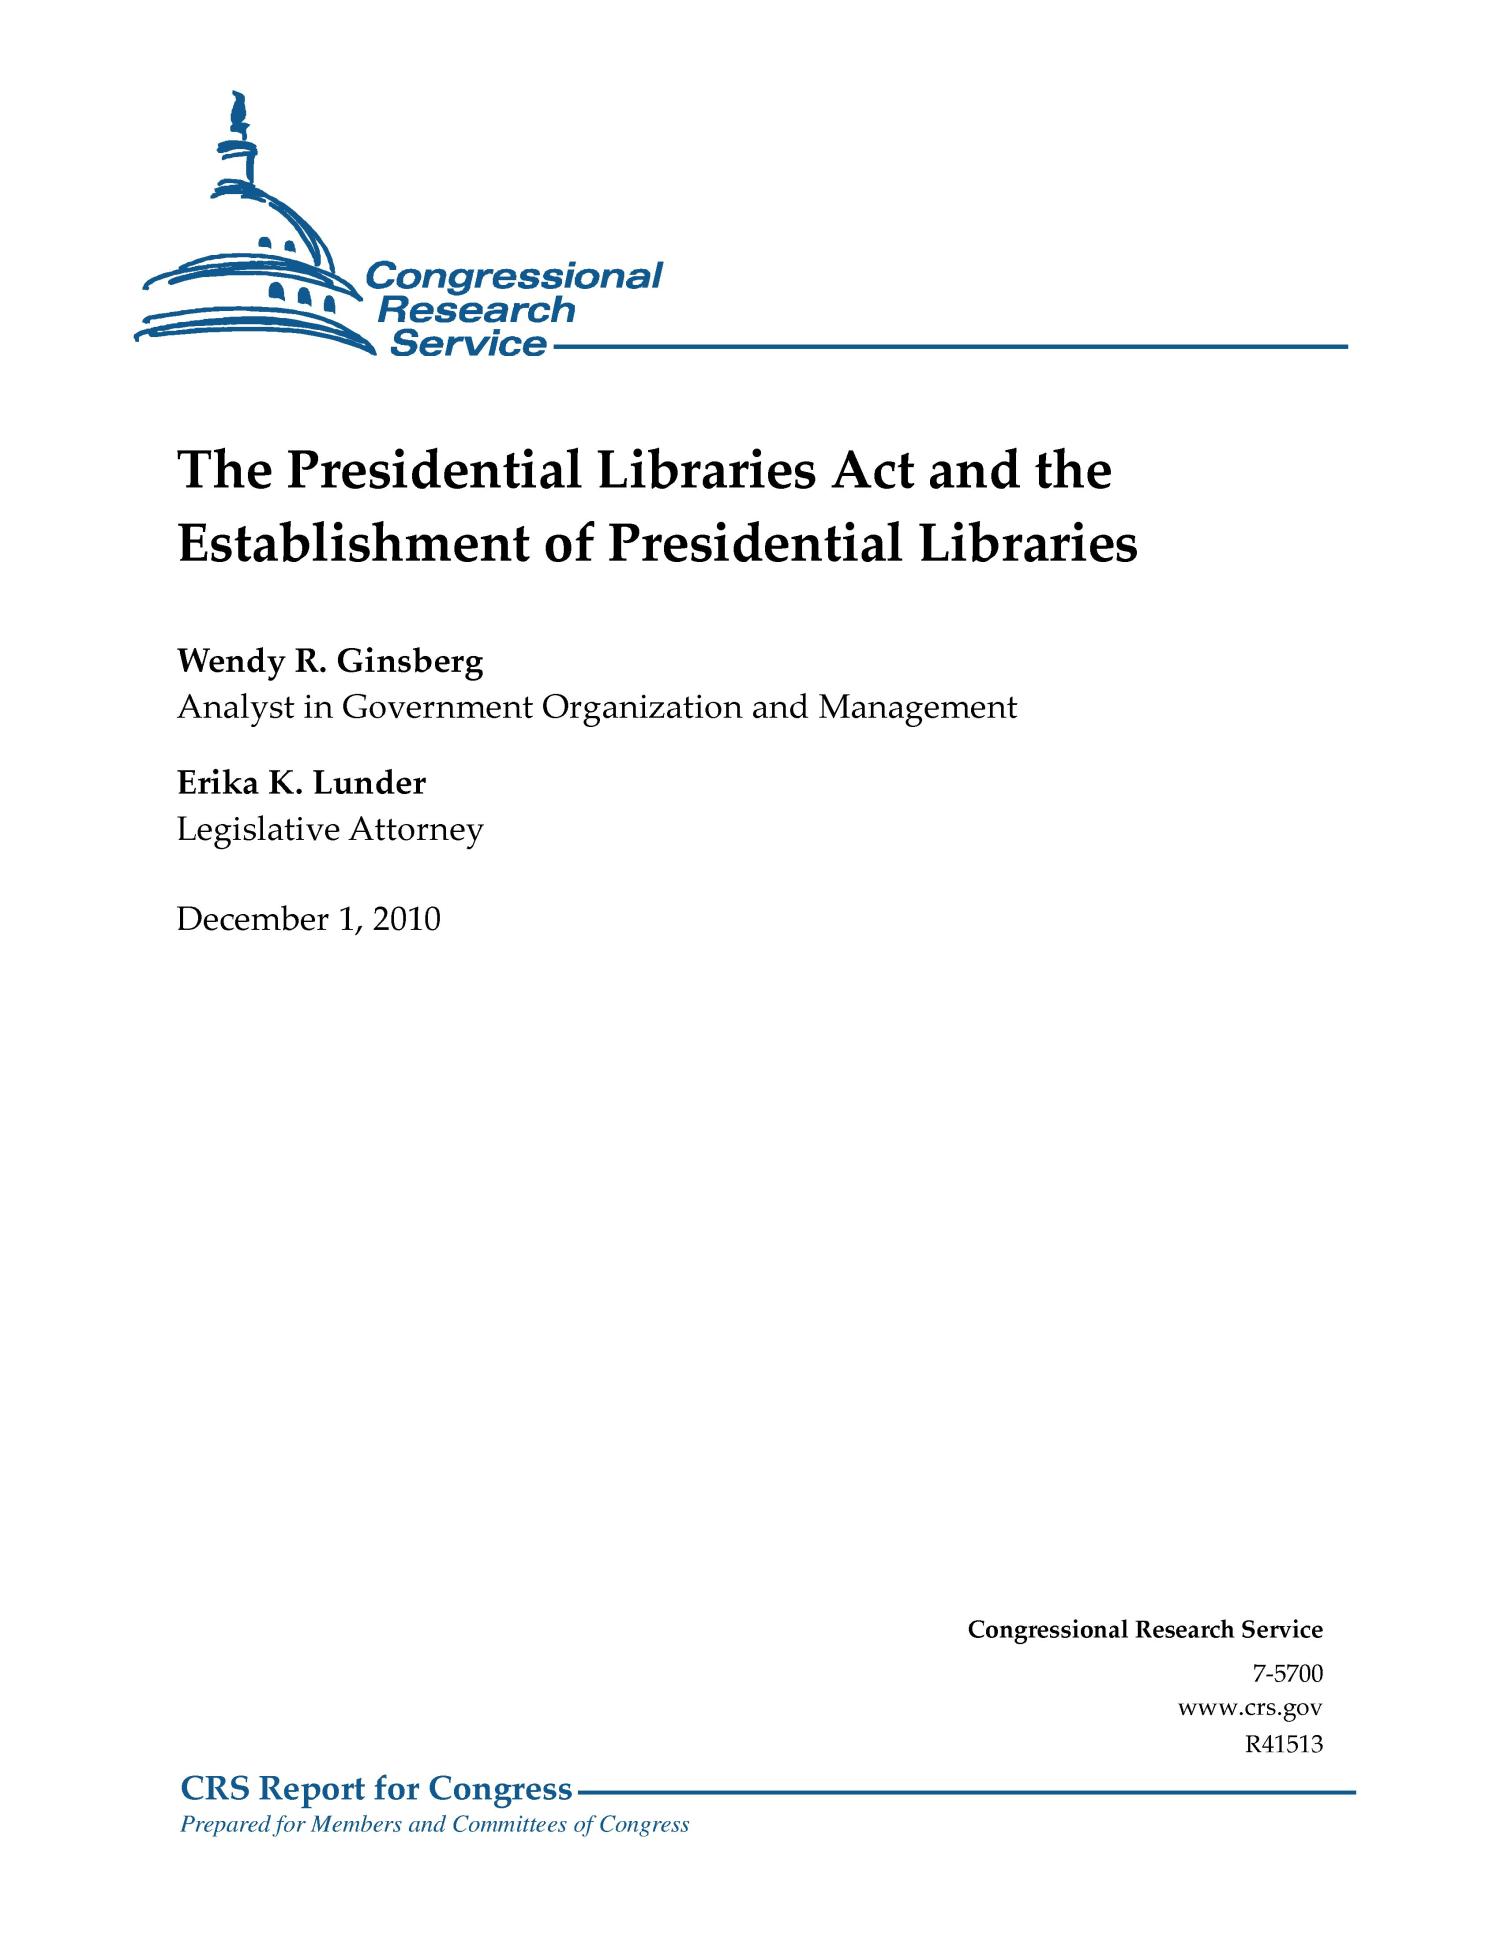 the-presidential-libraries-act-and-the-establishment-of-presidential